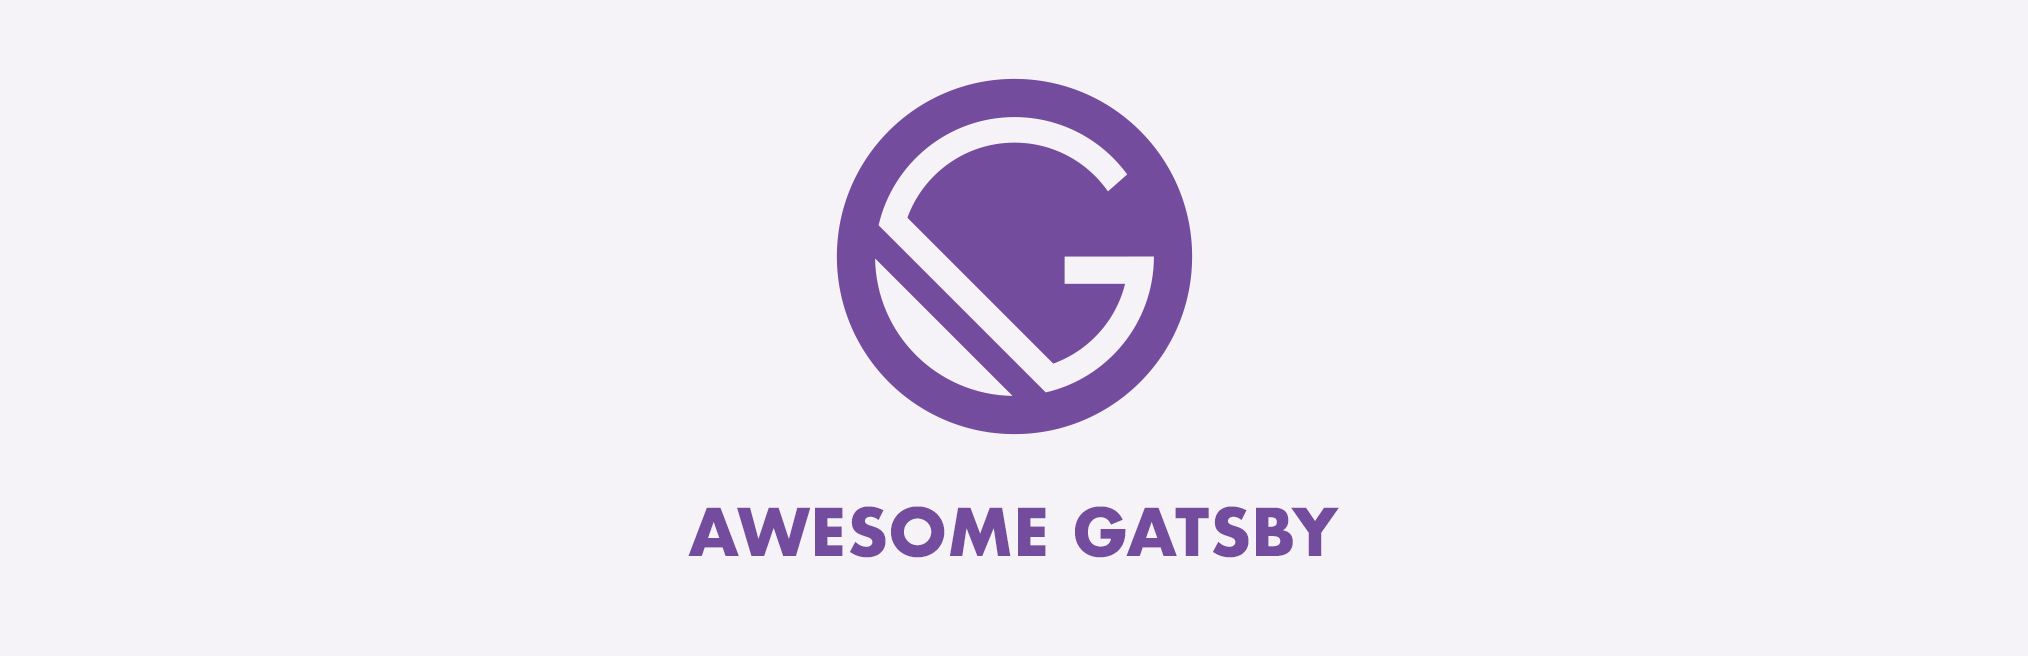 Awesome Gatsby